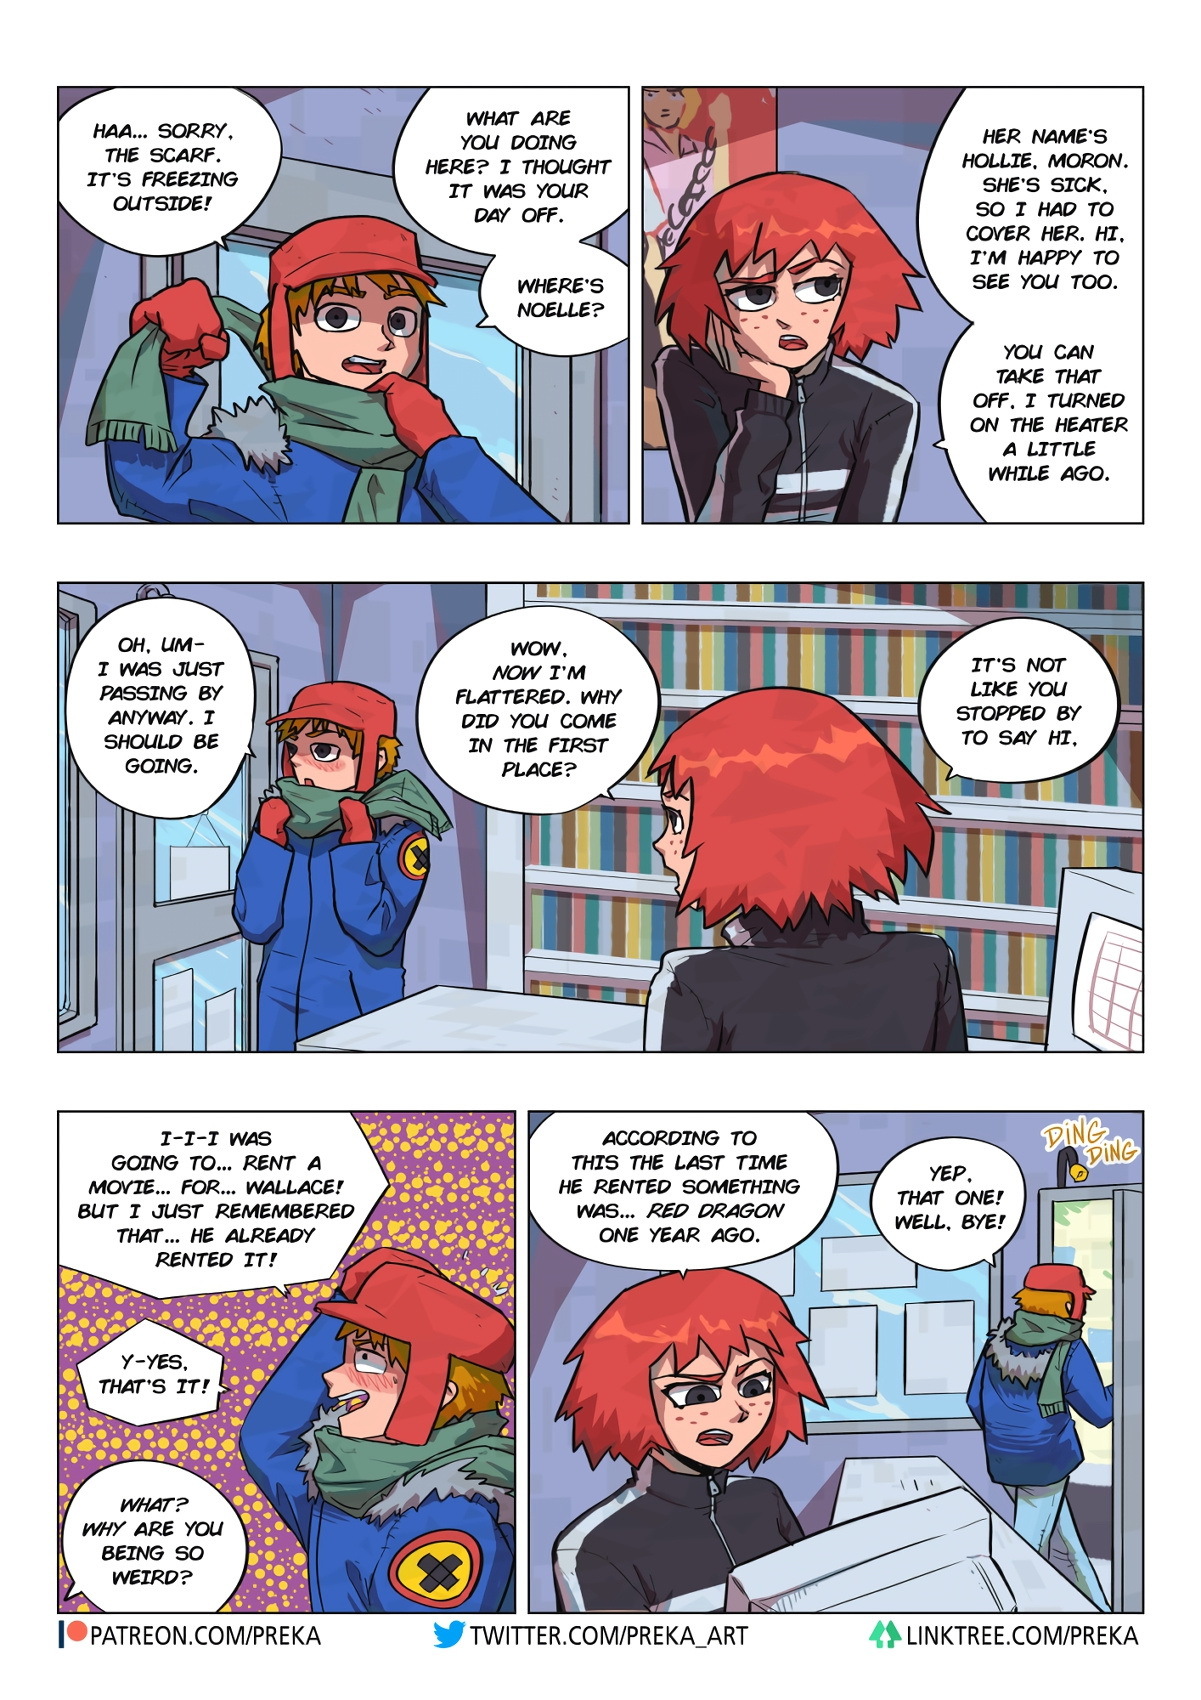 Kim Pine's Payday - Page 2